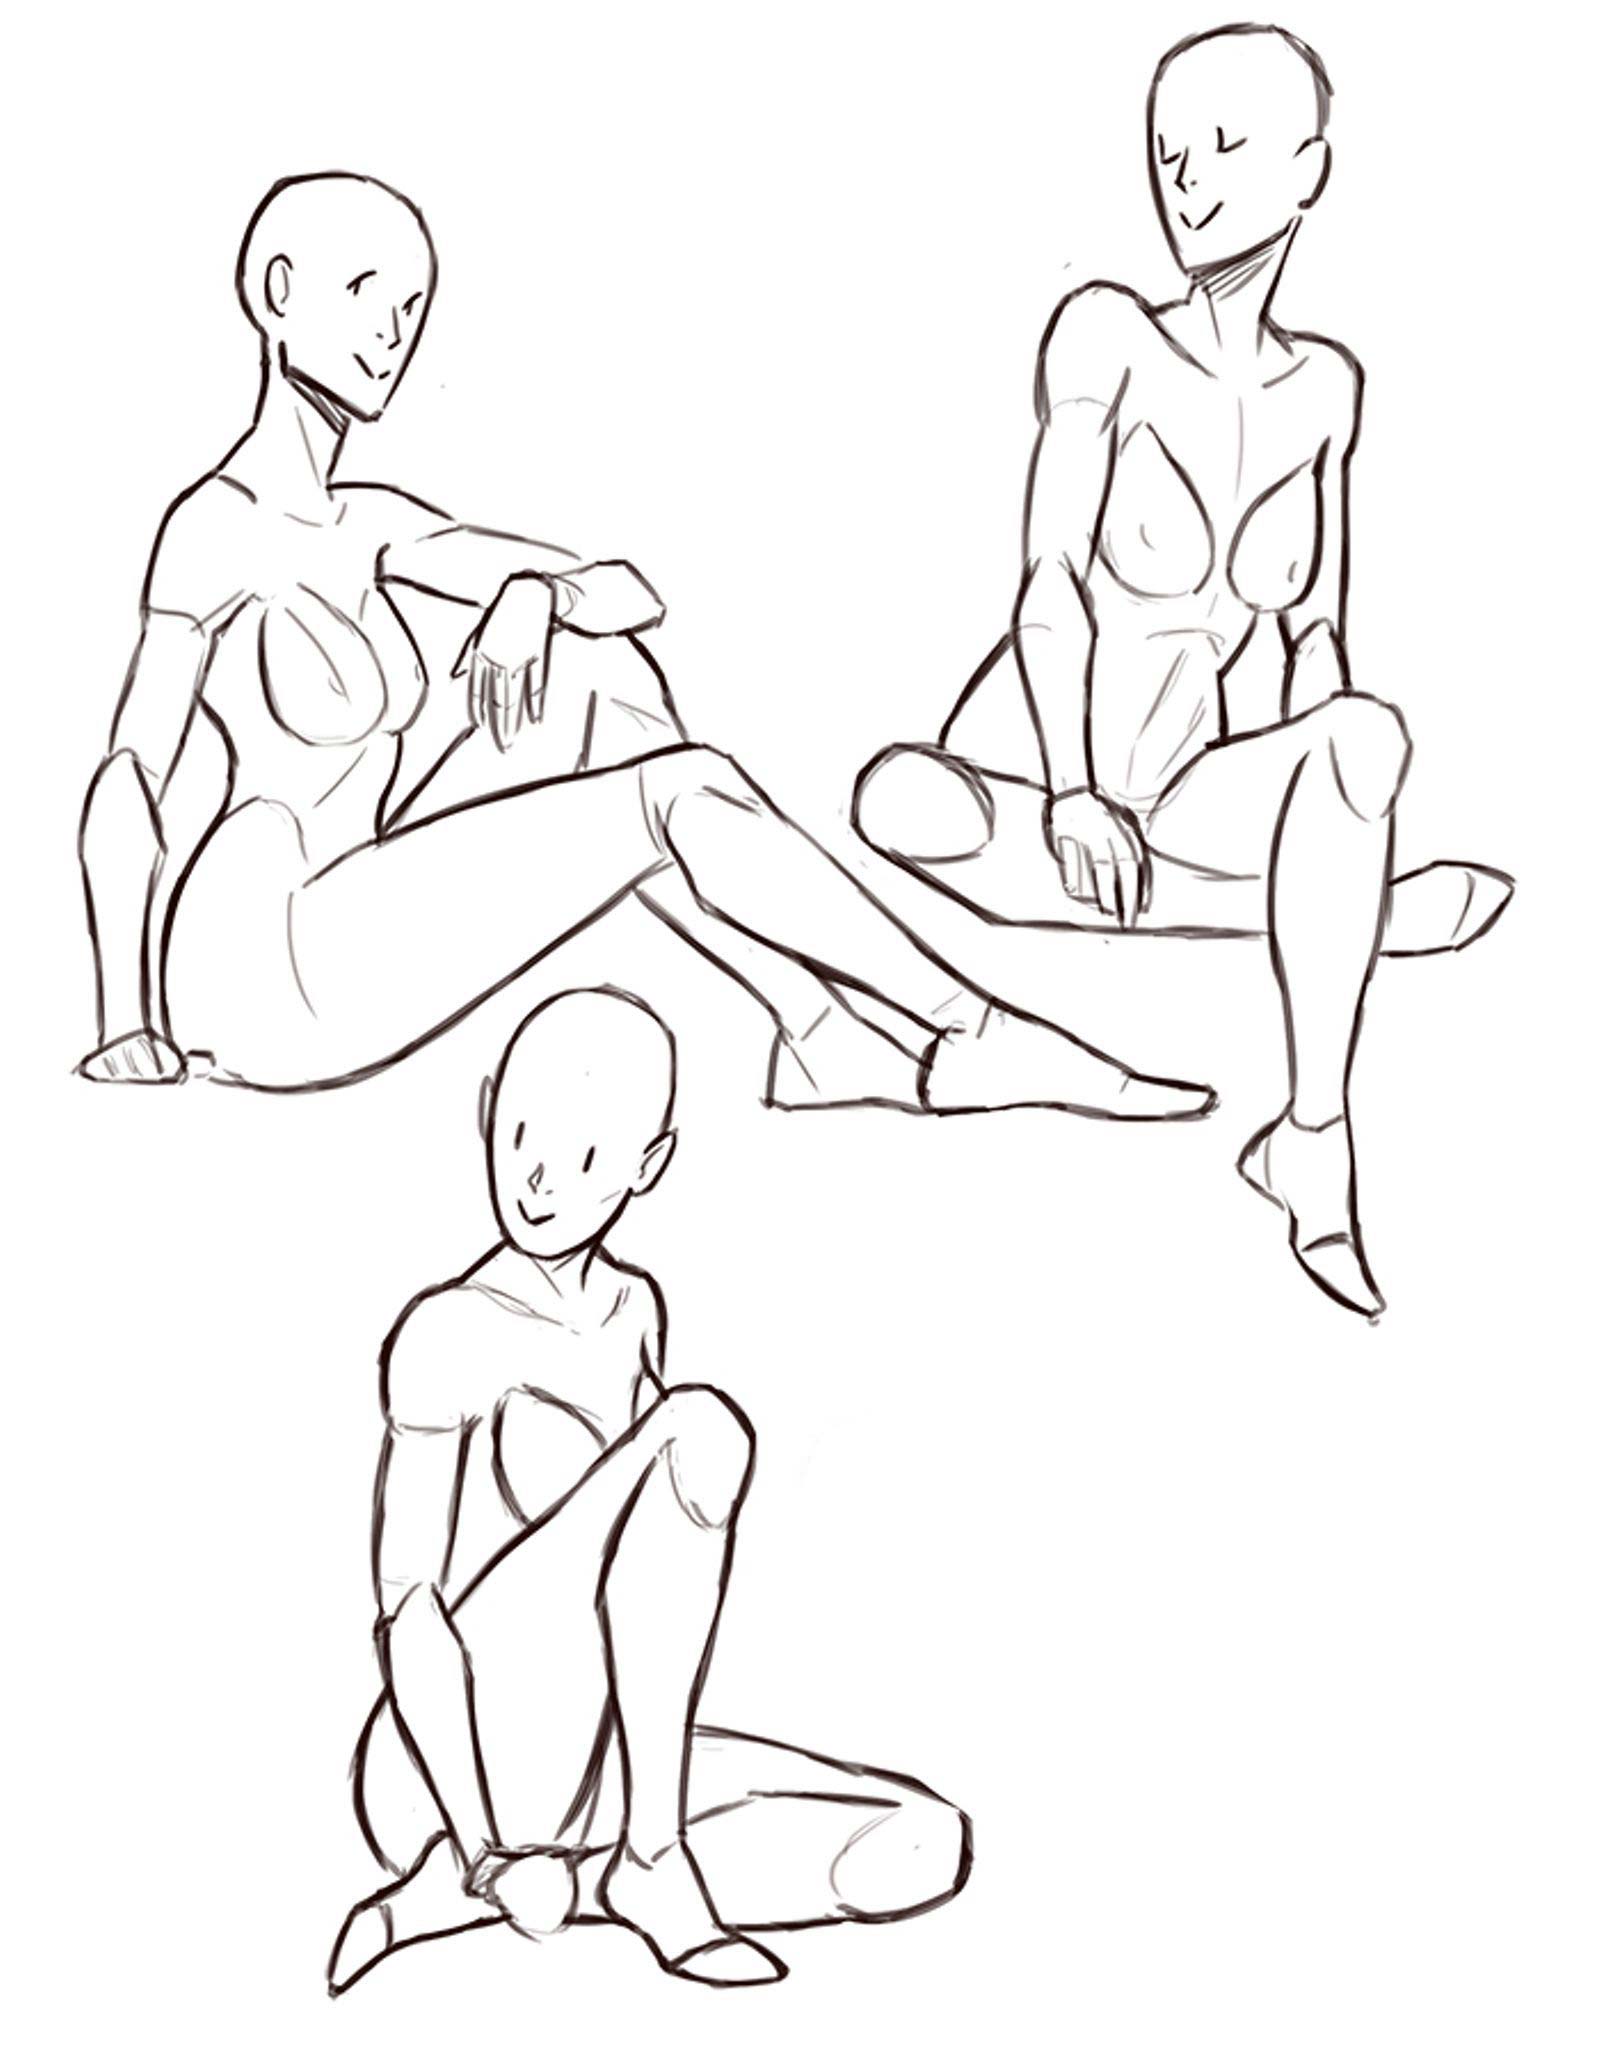 Sitting On The Ground Drawing Reference And Sketches For Artists Sitting pose reference human poses reference pose reference photo figure drawing reference body reference anatomy reference reference my poses are referenced from the most inspiring art photography available. sitting on the ground drawing reference